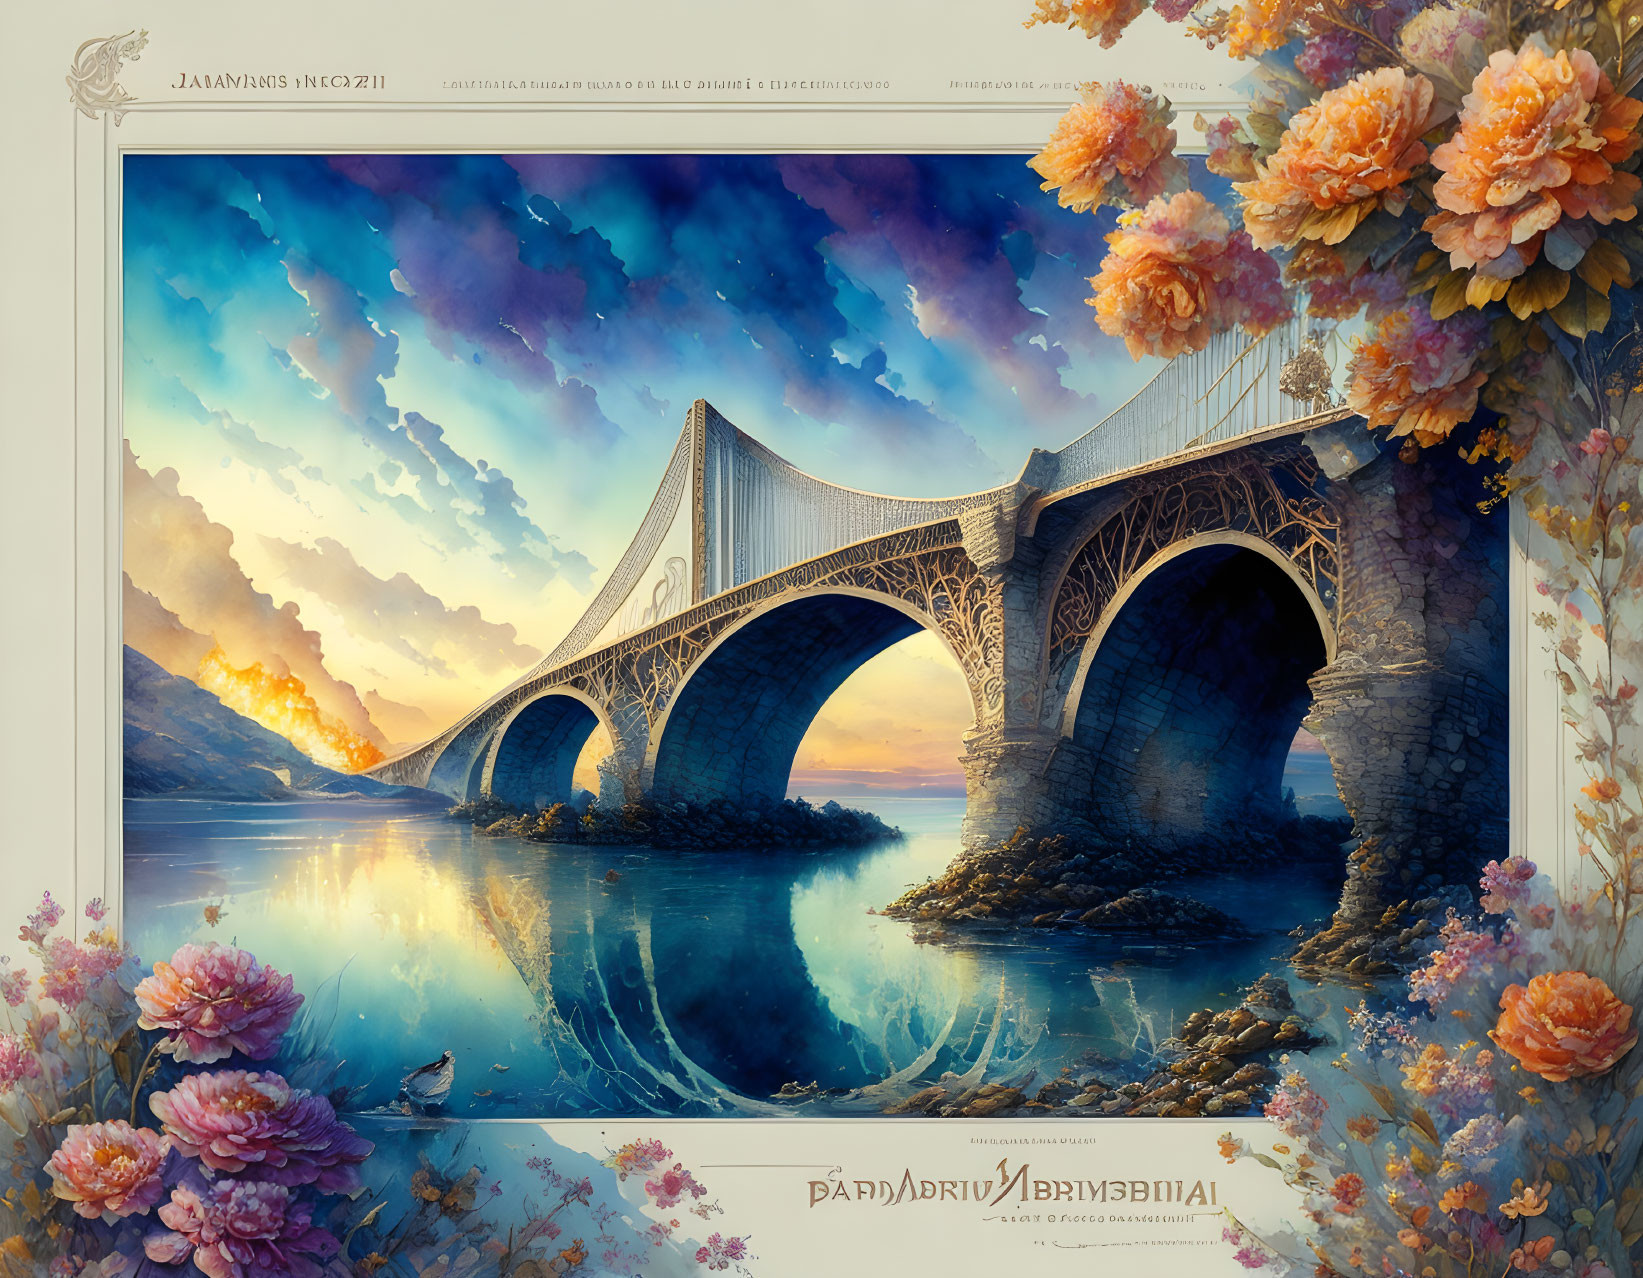 Vintage bridge illustration over calm water with orange flowers and dramatic sky at dawn or dusk